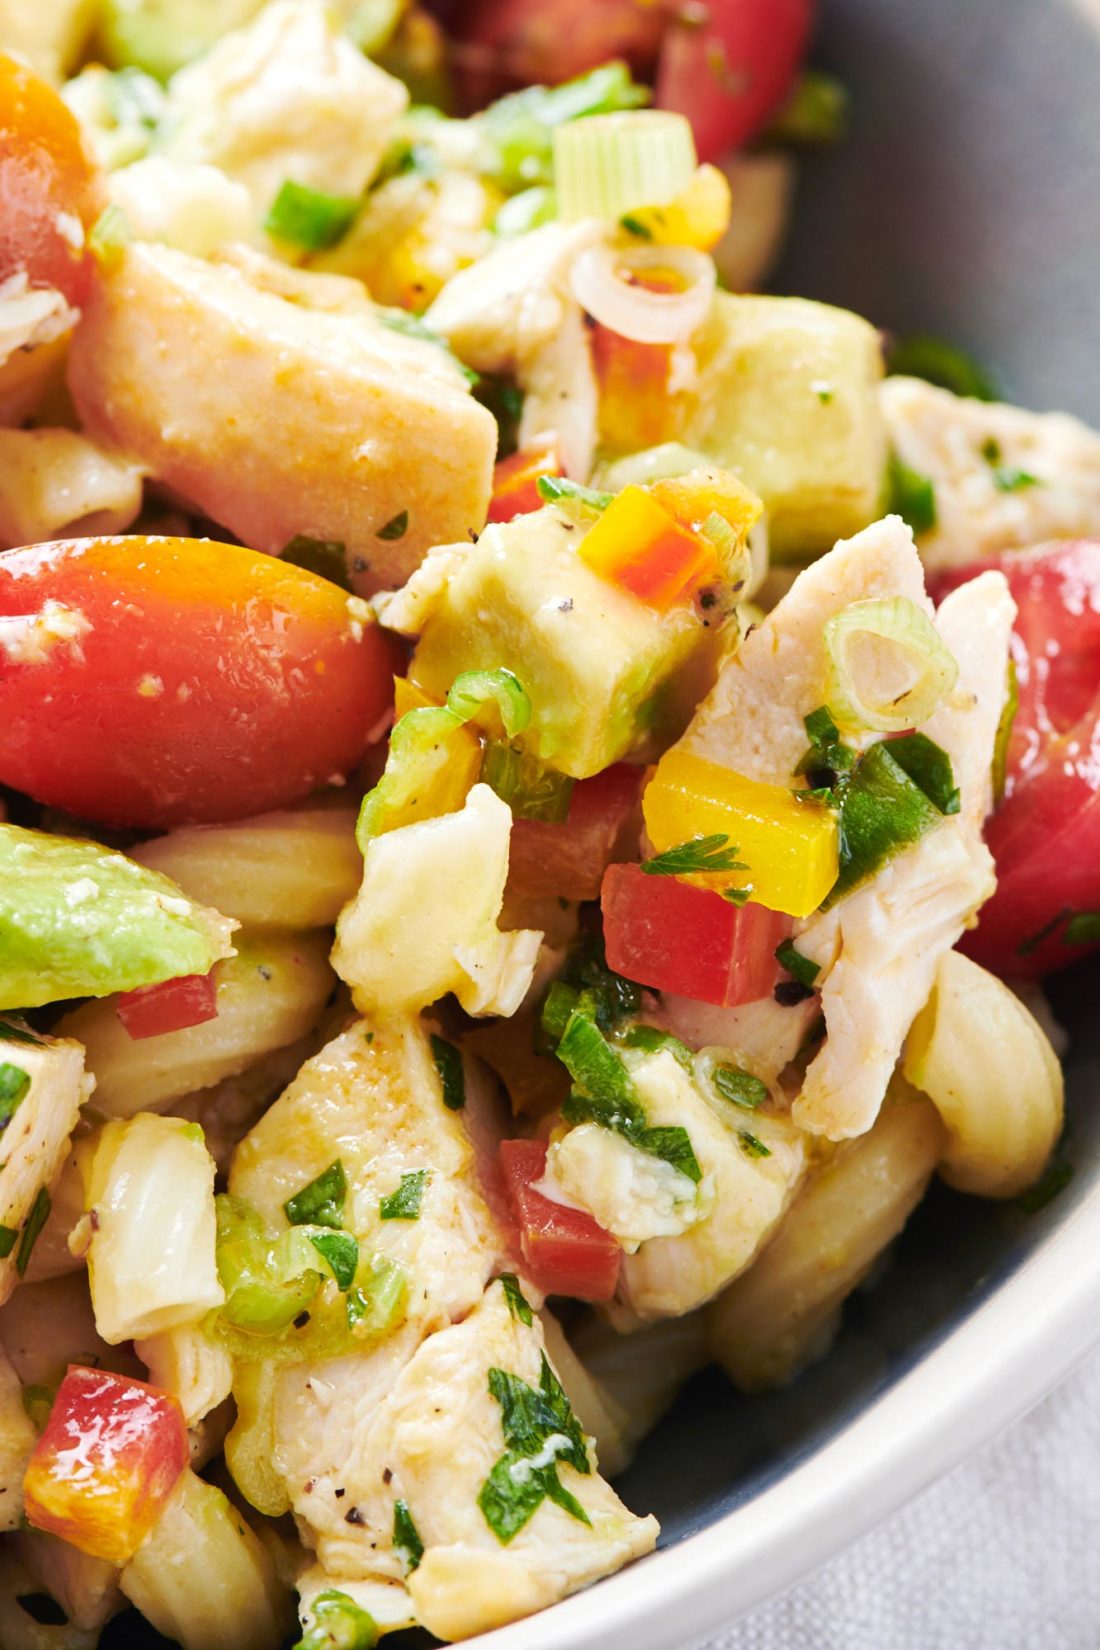 Pasta Salad with Chicken, Avocado and Tomato heaped in a bowl.